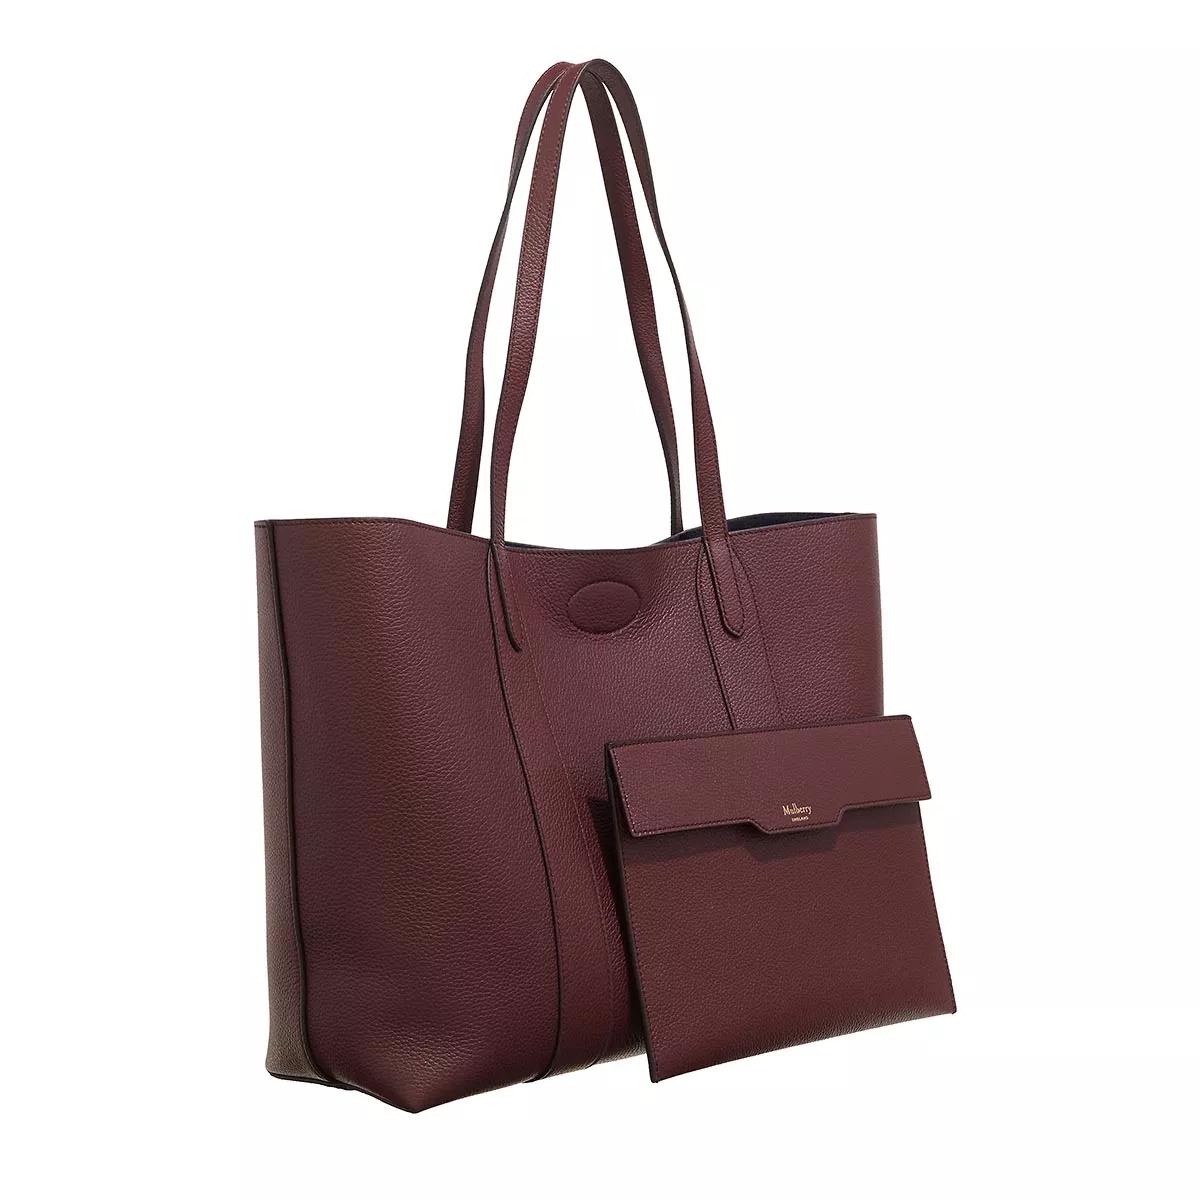 Mulberry Shoppers Bayswater Tote Leather in bruin